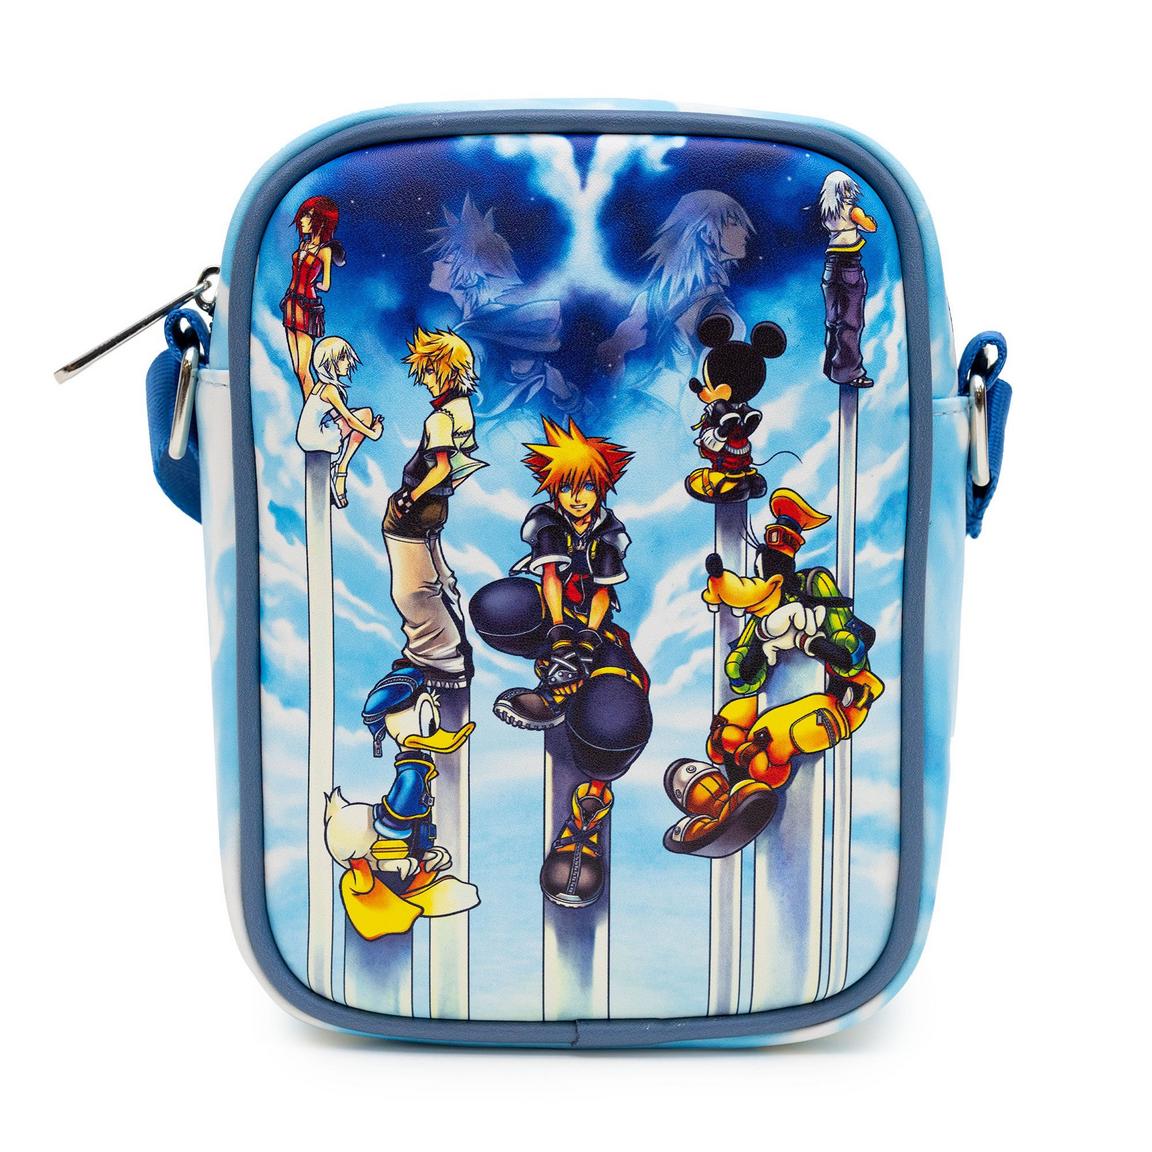 Buckle-Down Disney Kingdom Hearts III Polyurethane Crossbody Bag with Piping Edge and Cell Phone Pocket, Size: One Size, Buckle Down